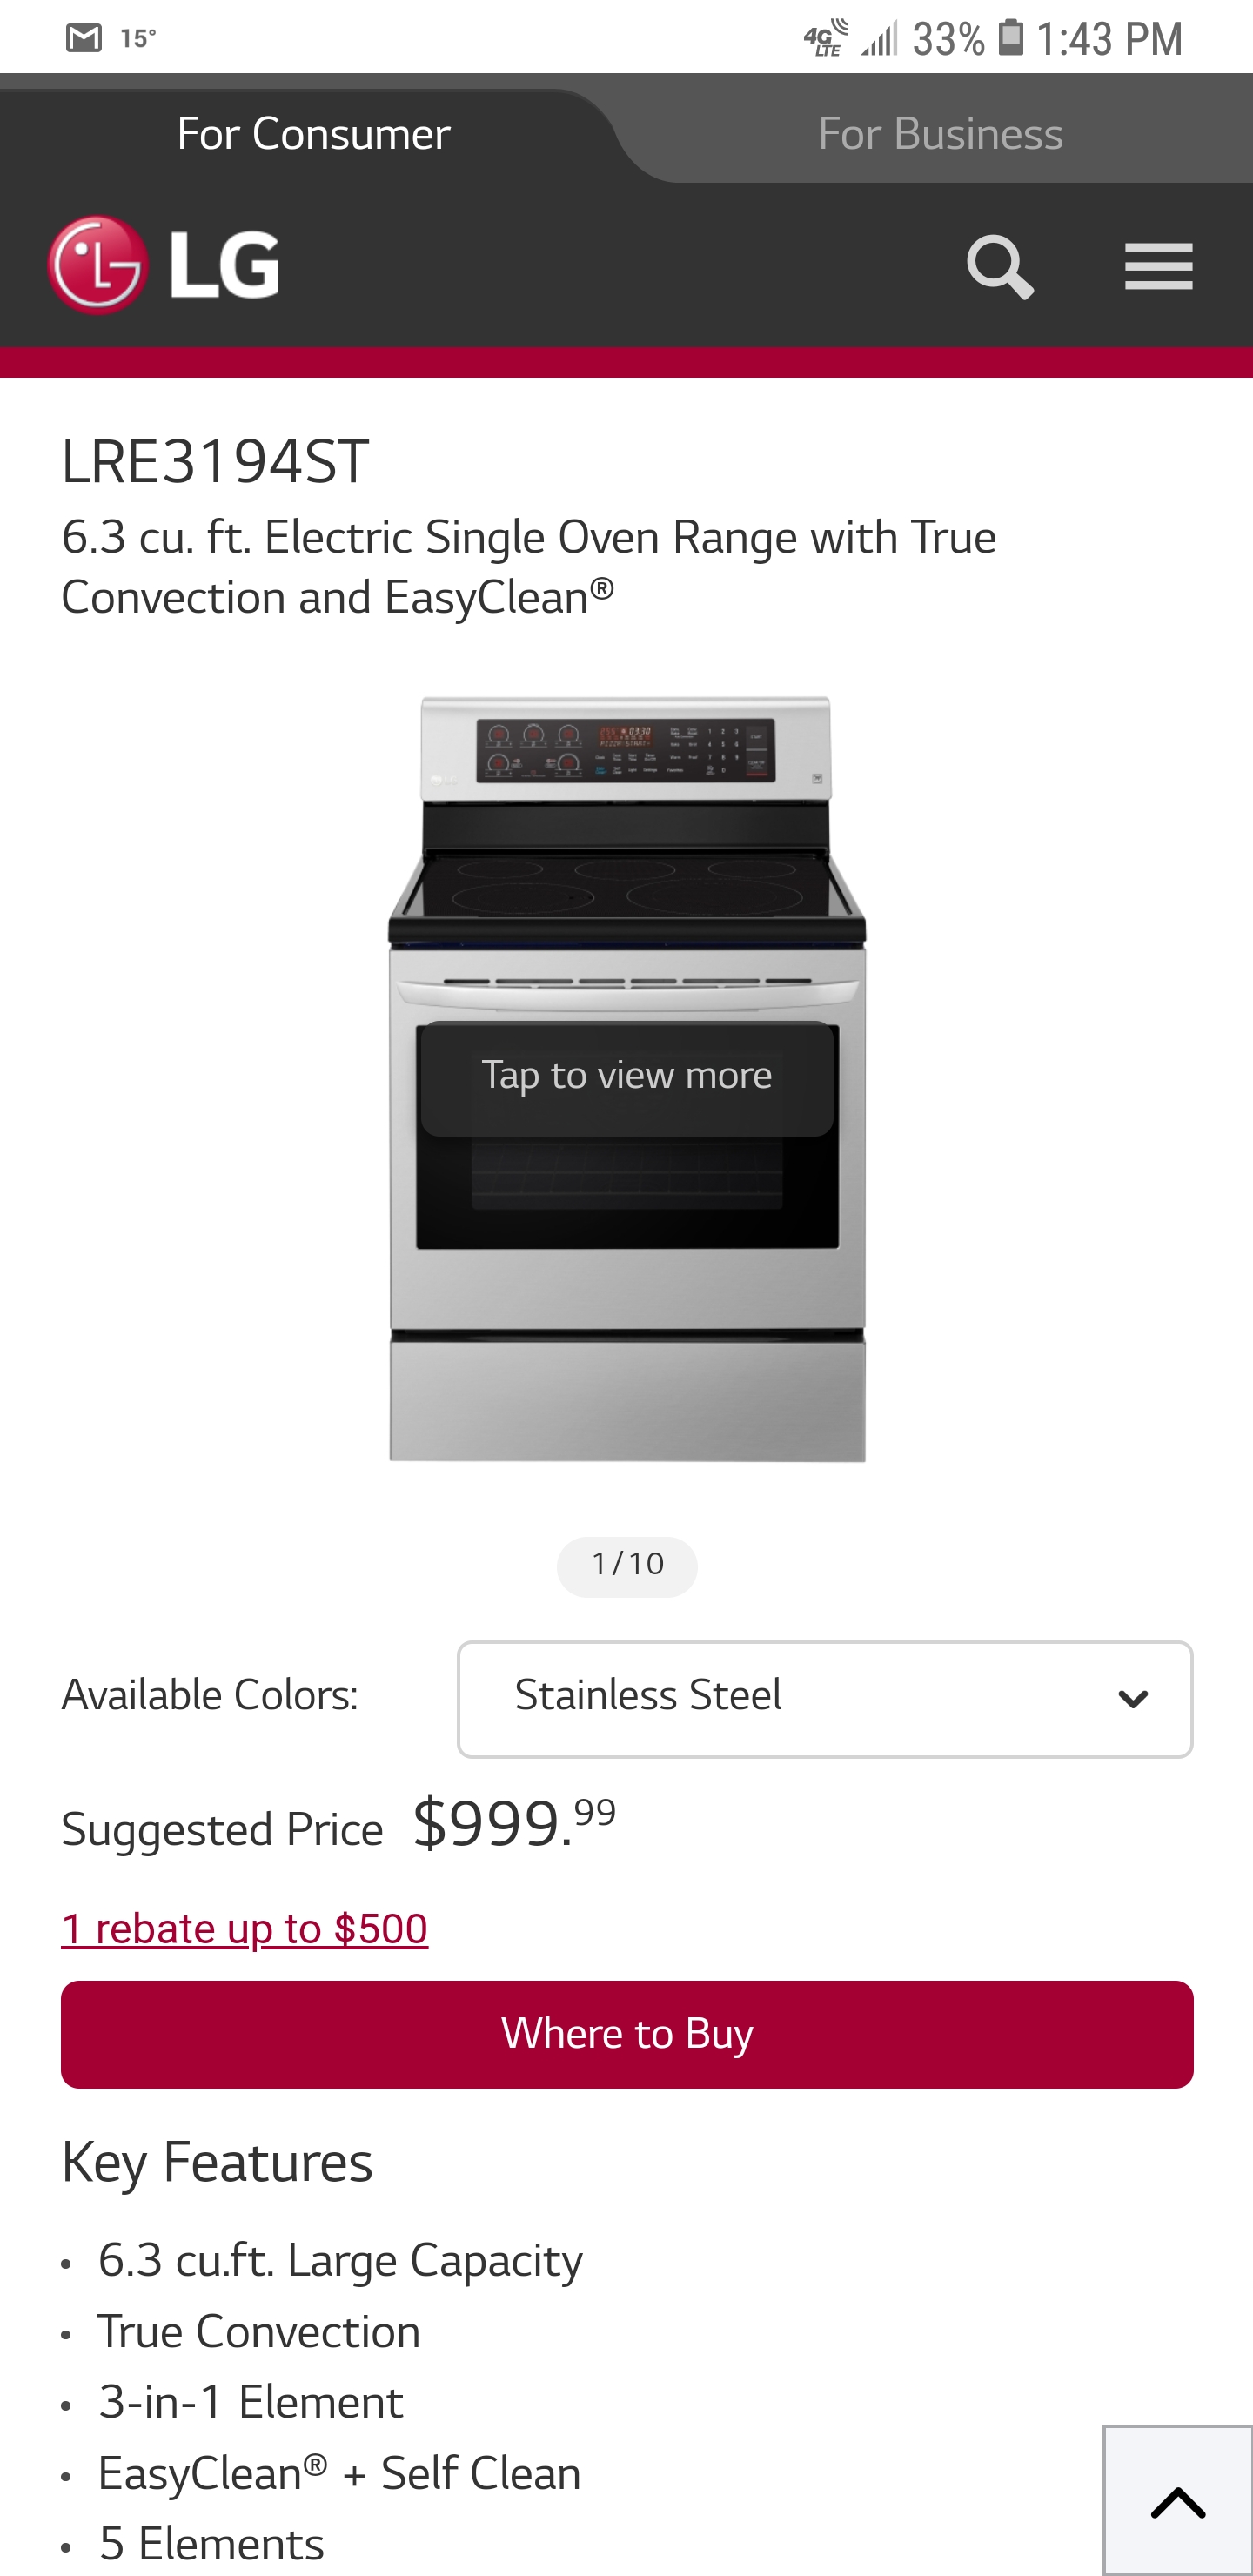 LG Website. True Convection clearly stated